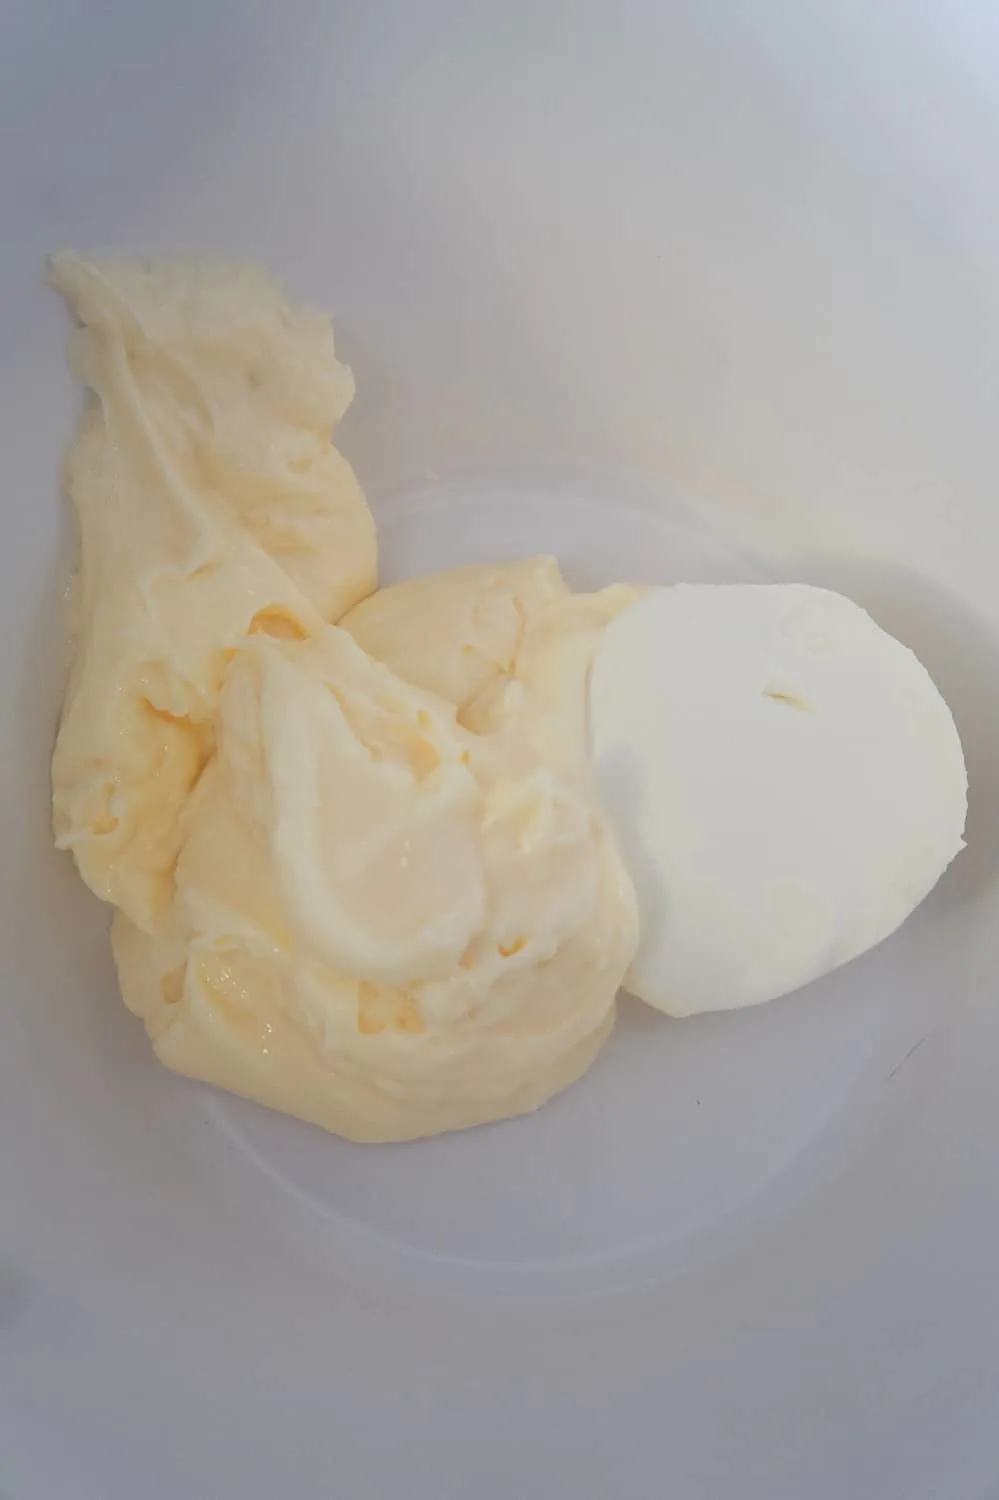 mayo and cream cheese in a mixing bowl